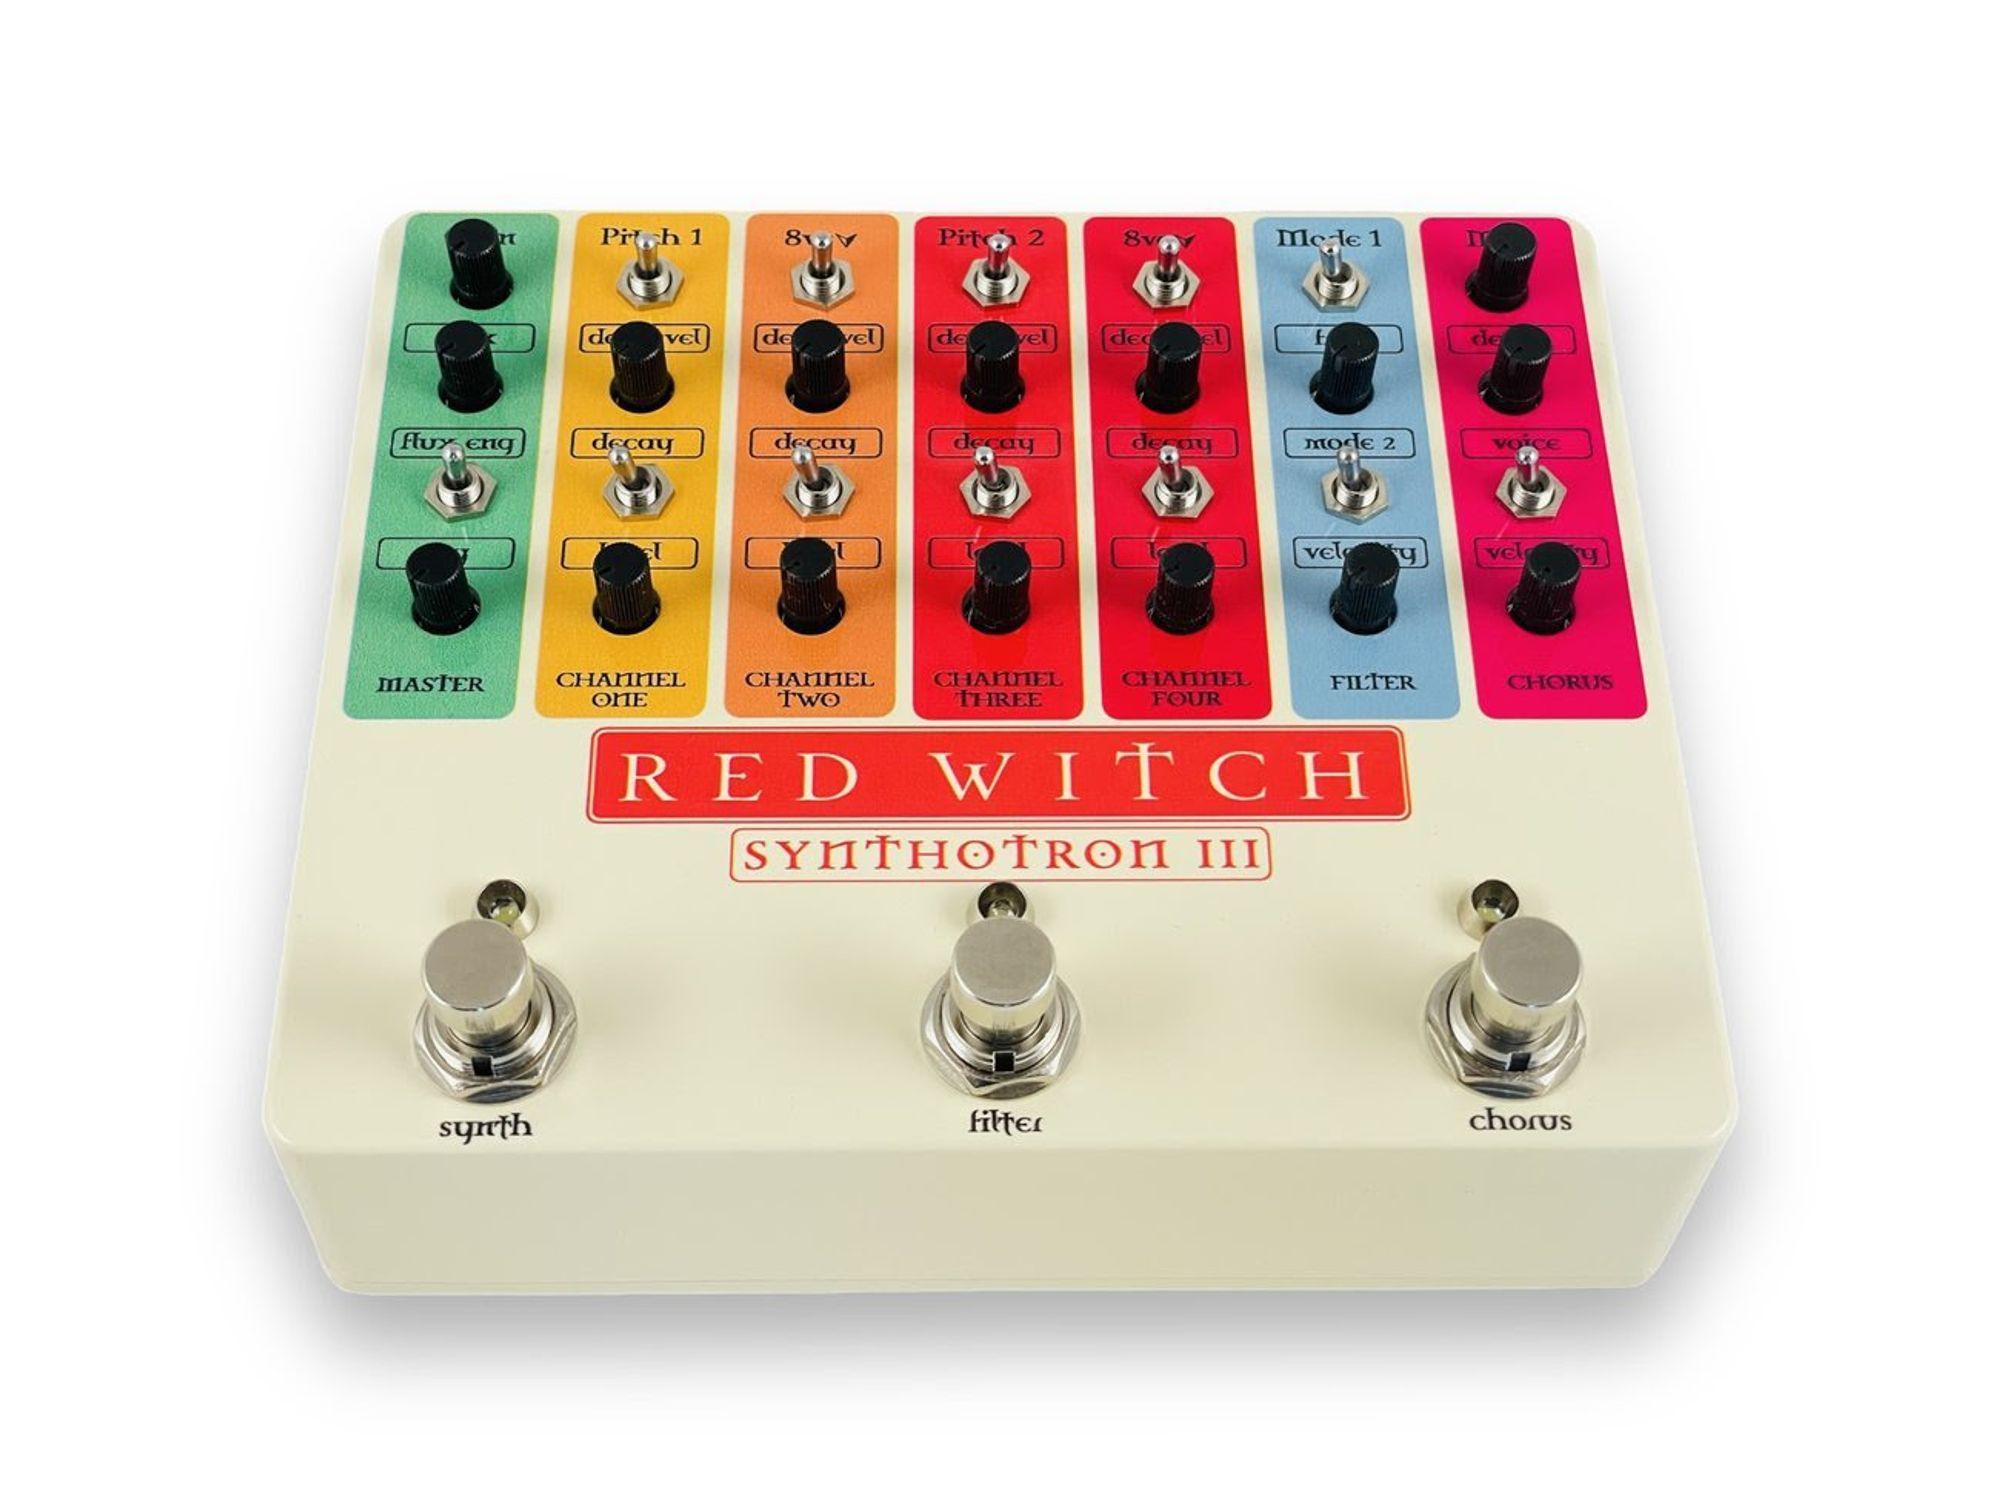 Red Witch Launches the Synthotron III